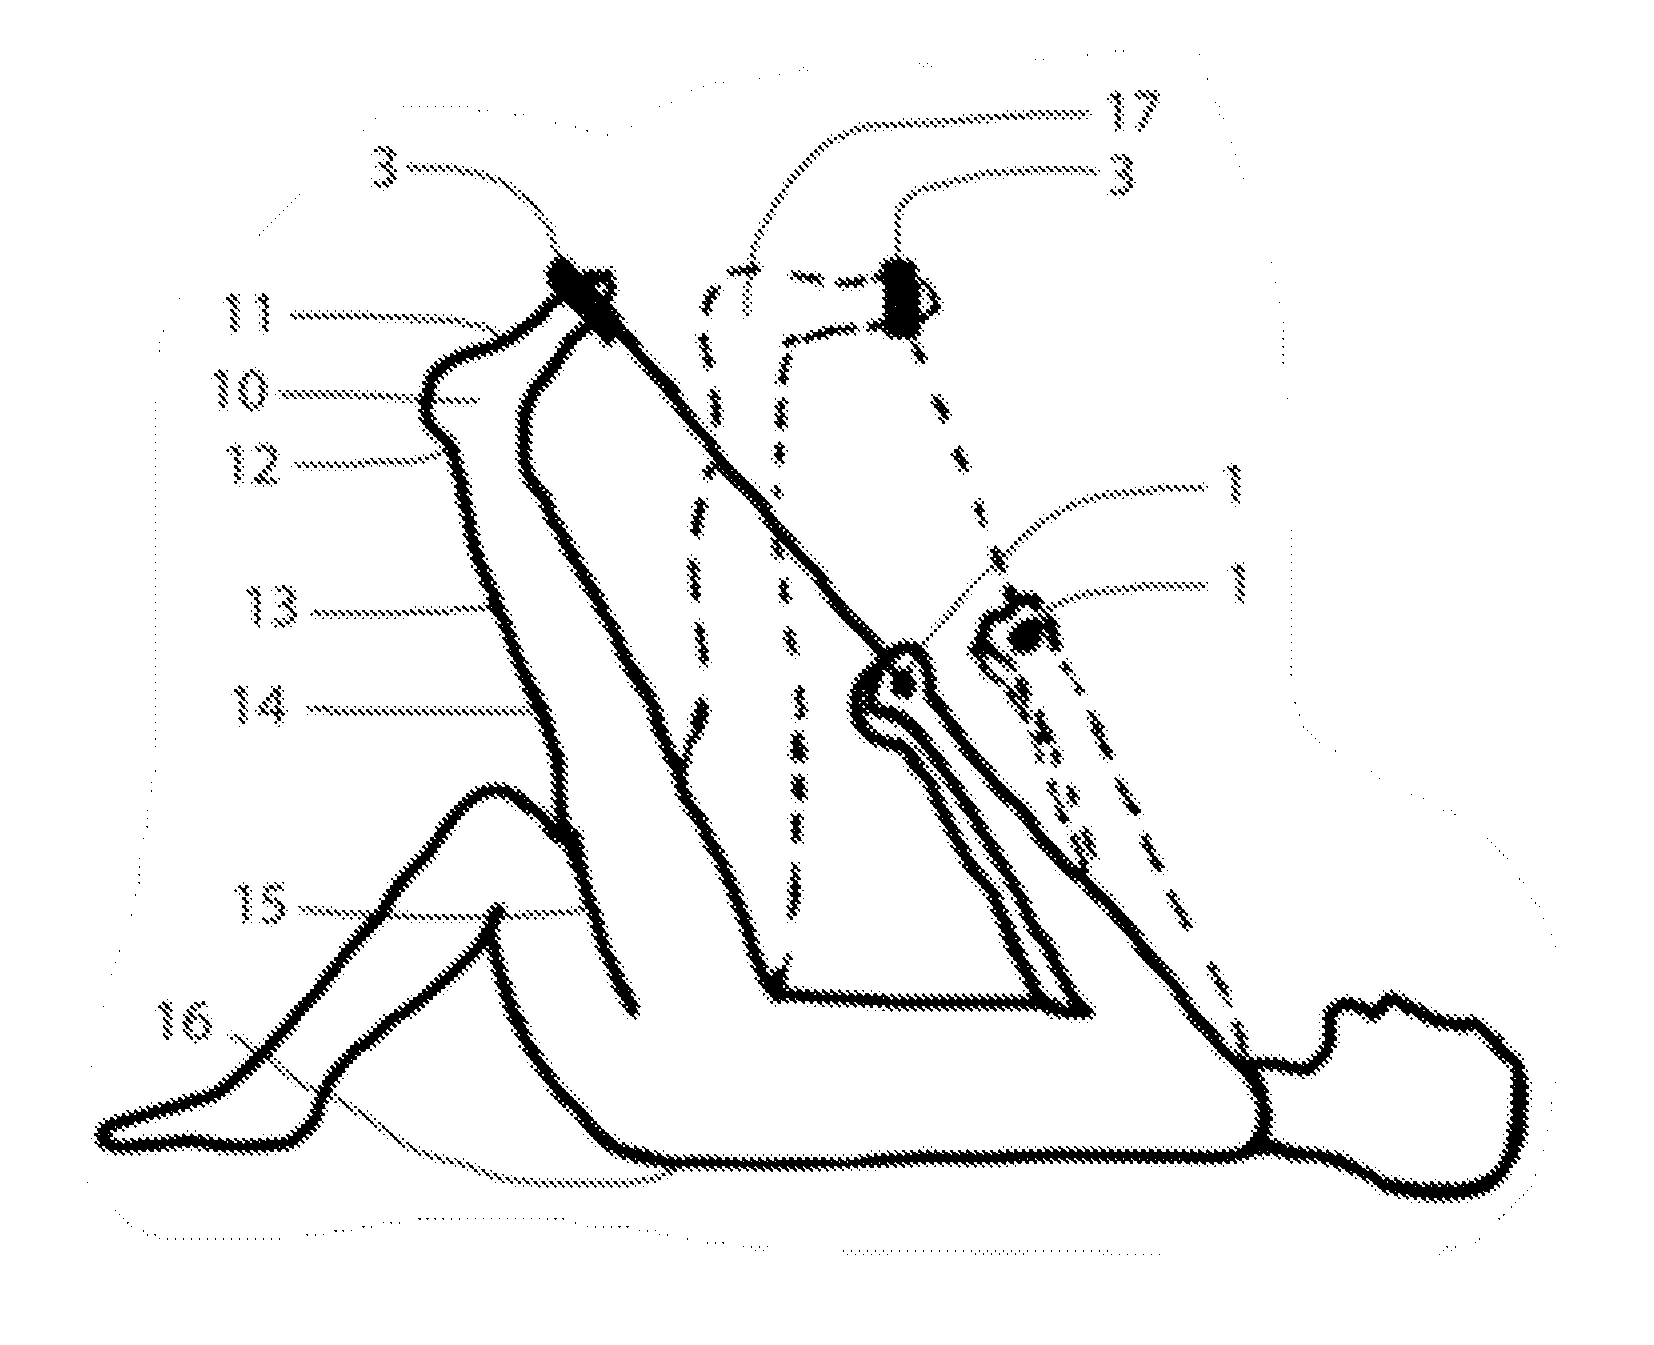 Handheld Extremity Flexibility Evaluation And Treatment Device